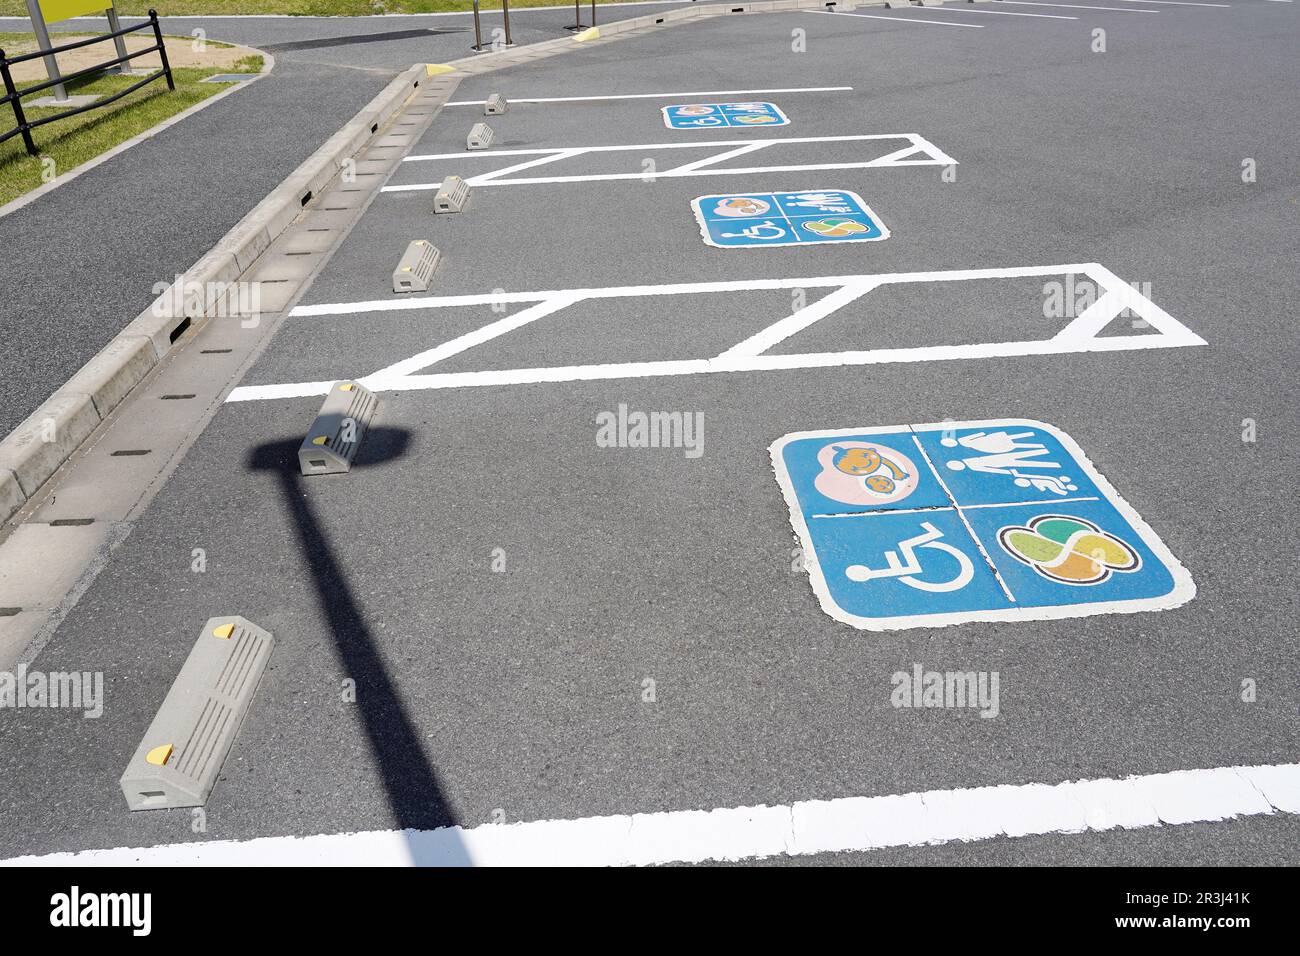 Road marking for handicapped parking stall in a parking lot Stock Photo